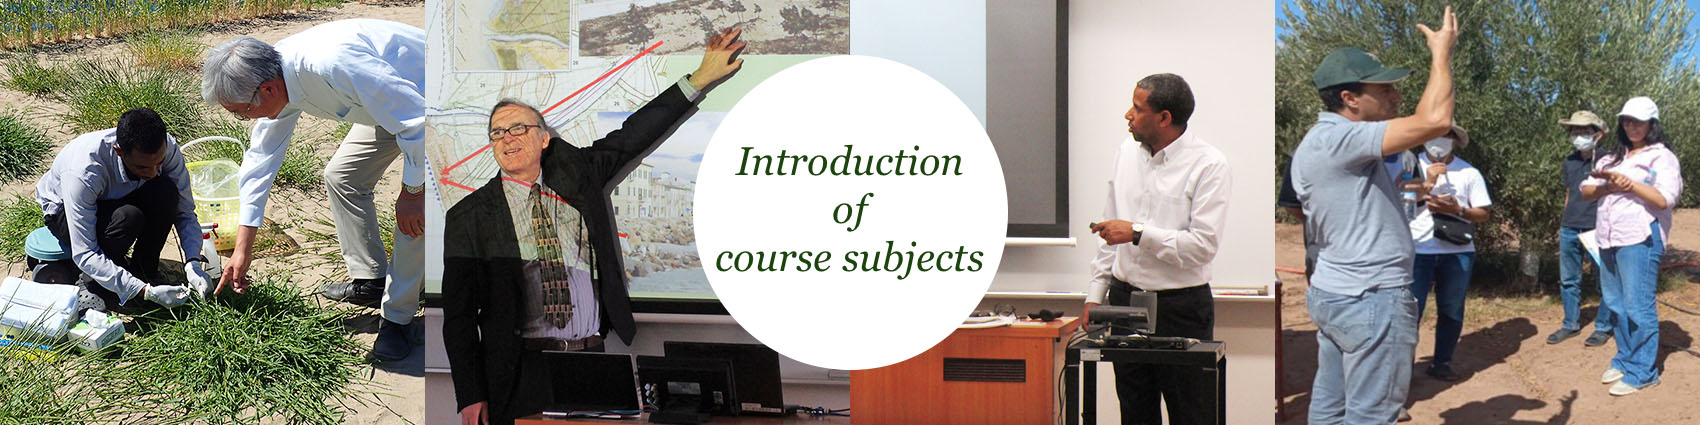 Introduction of course subjects